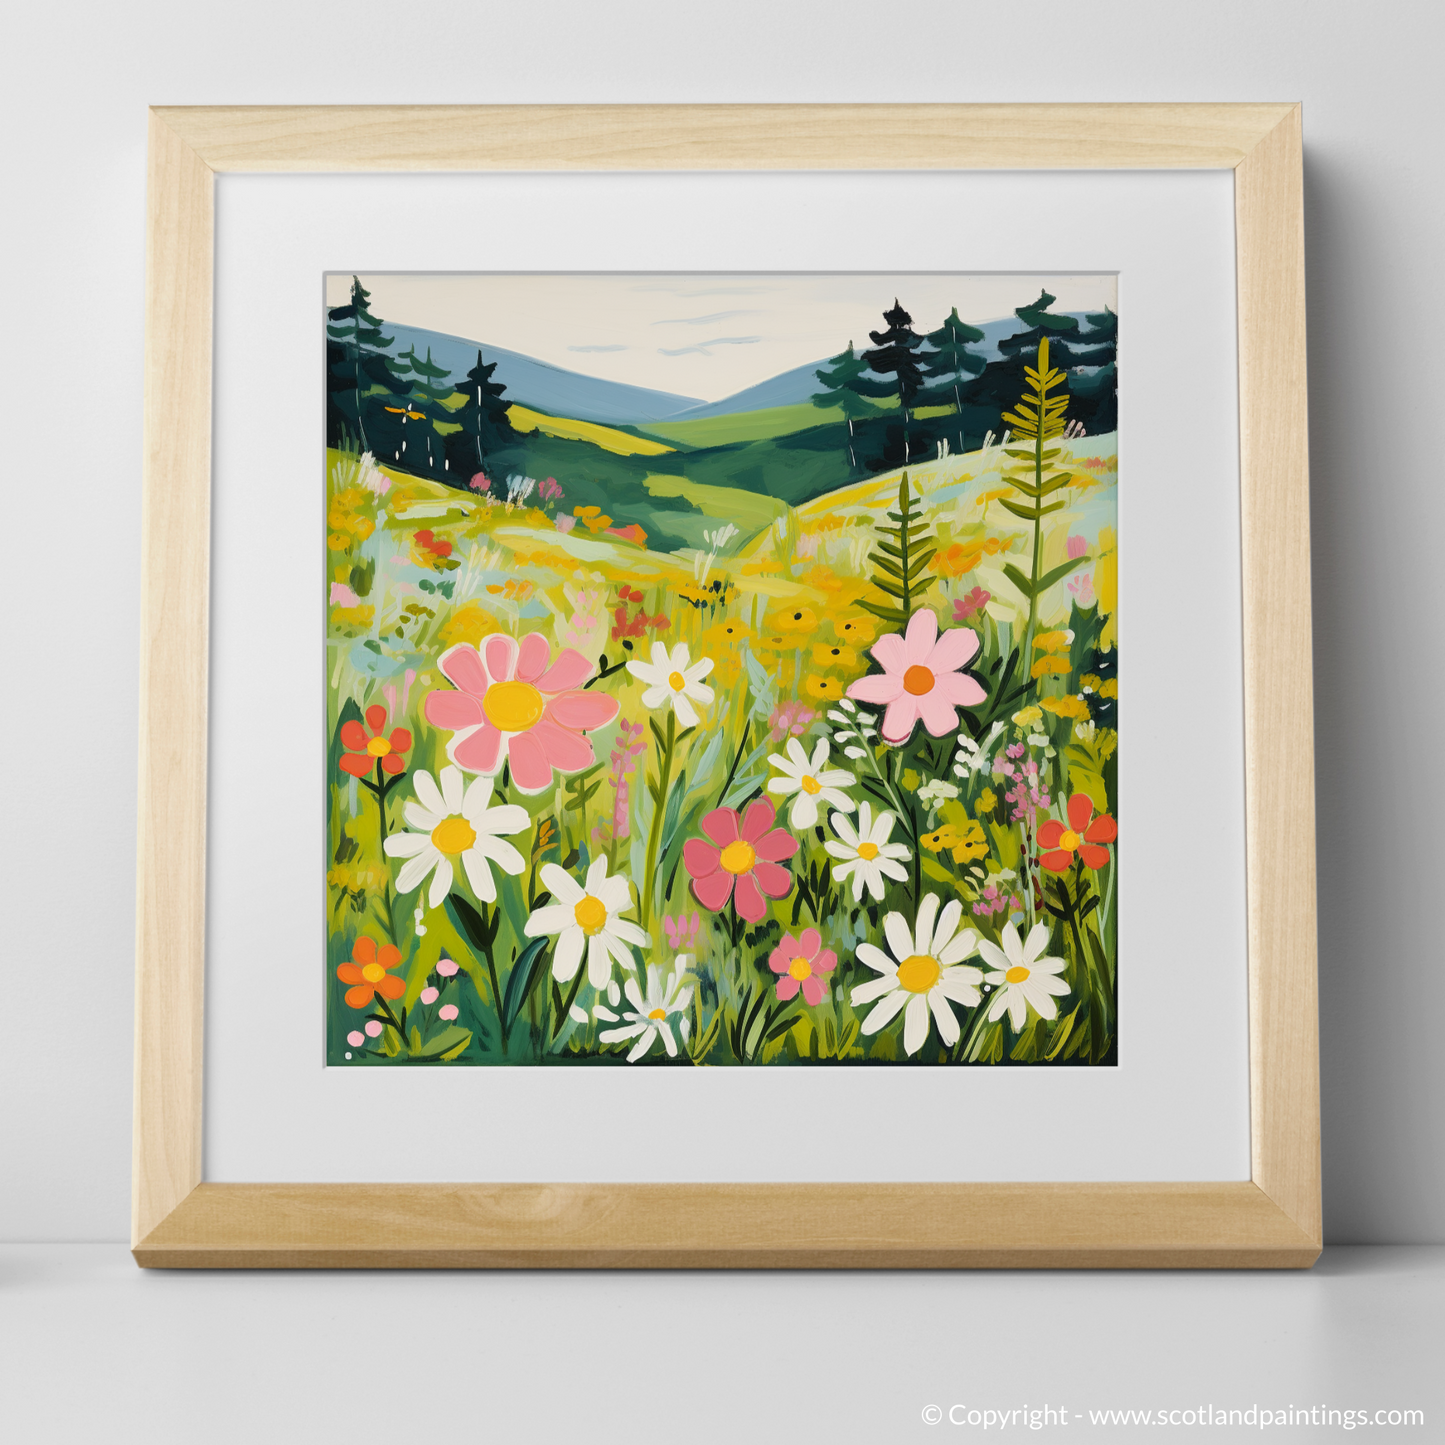 Enchanted Meadow: A Naive Art Tribute to Galloway Forest Park Flora